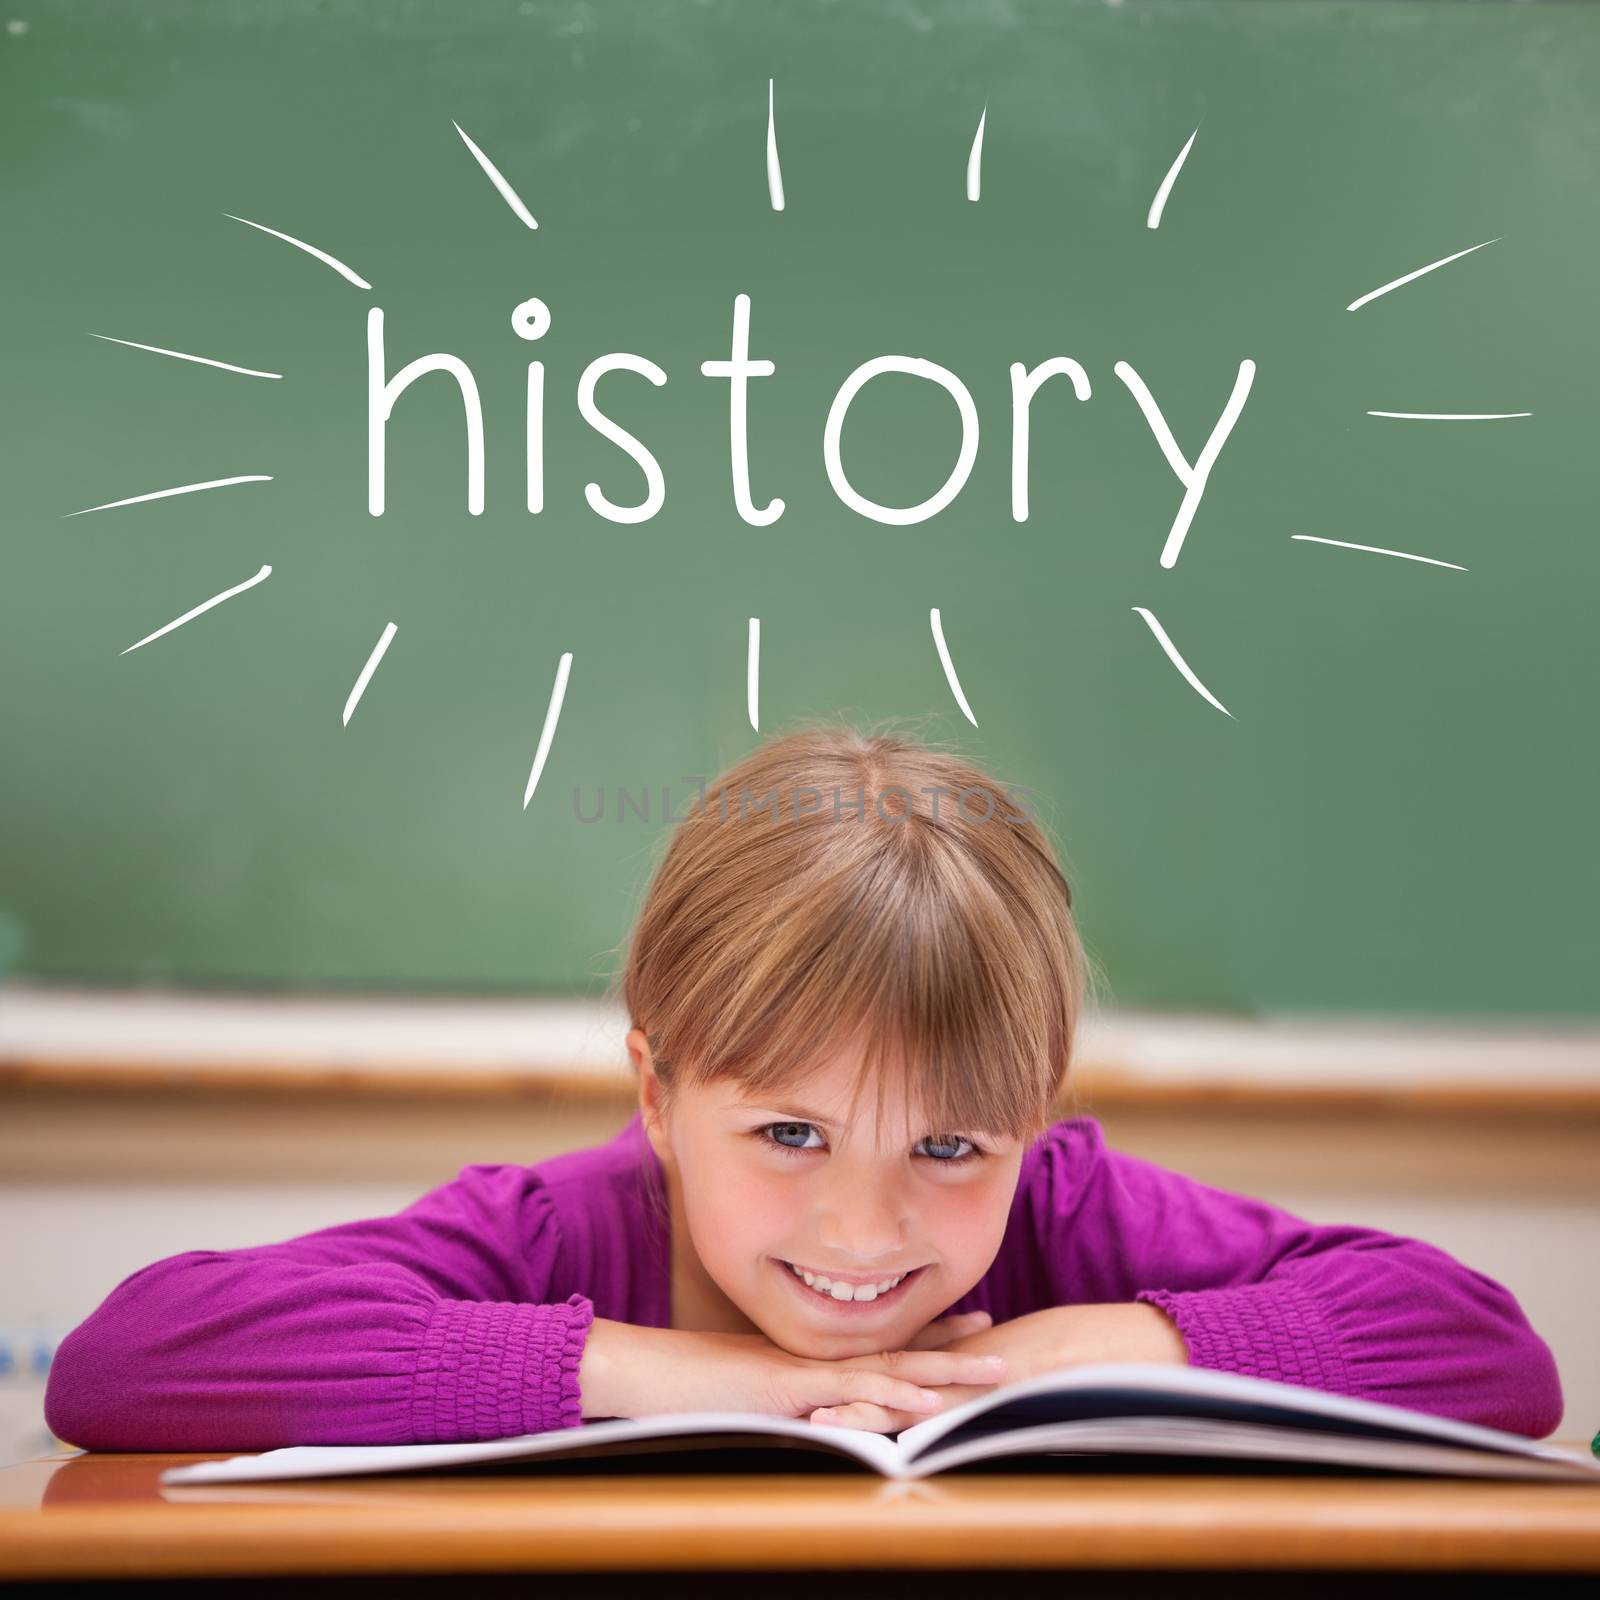 The word history against cute pupil sitting at desk